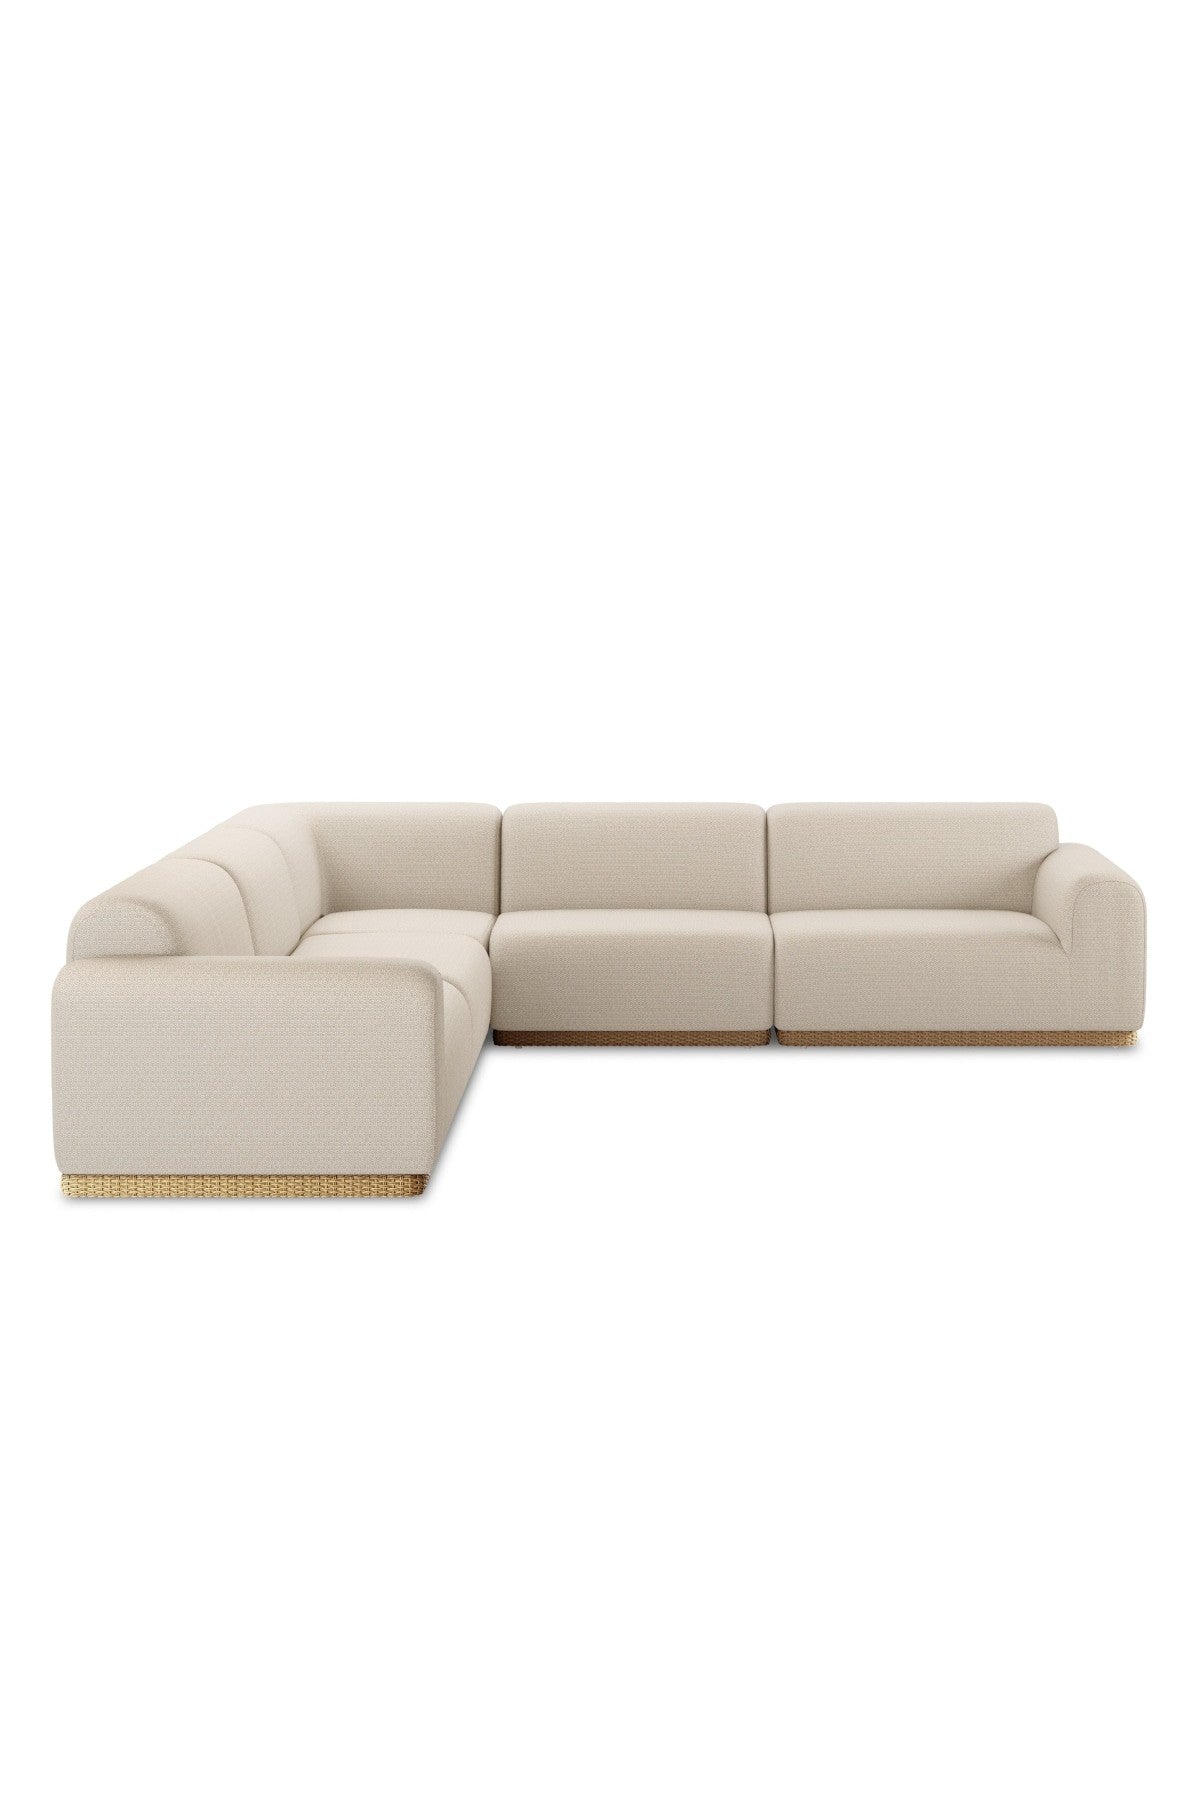 Romley Outdoor 5-Piece Sectional